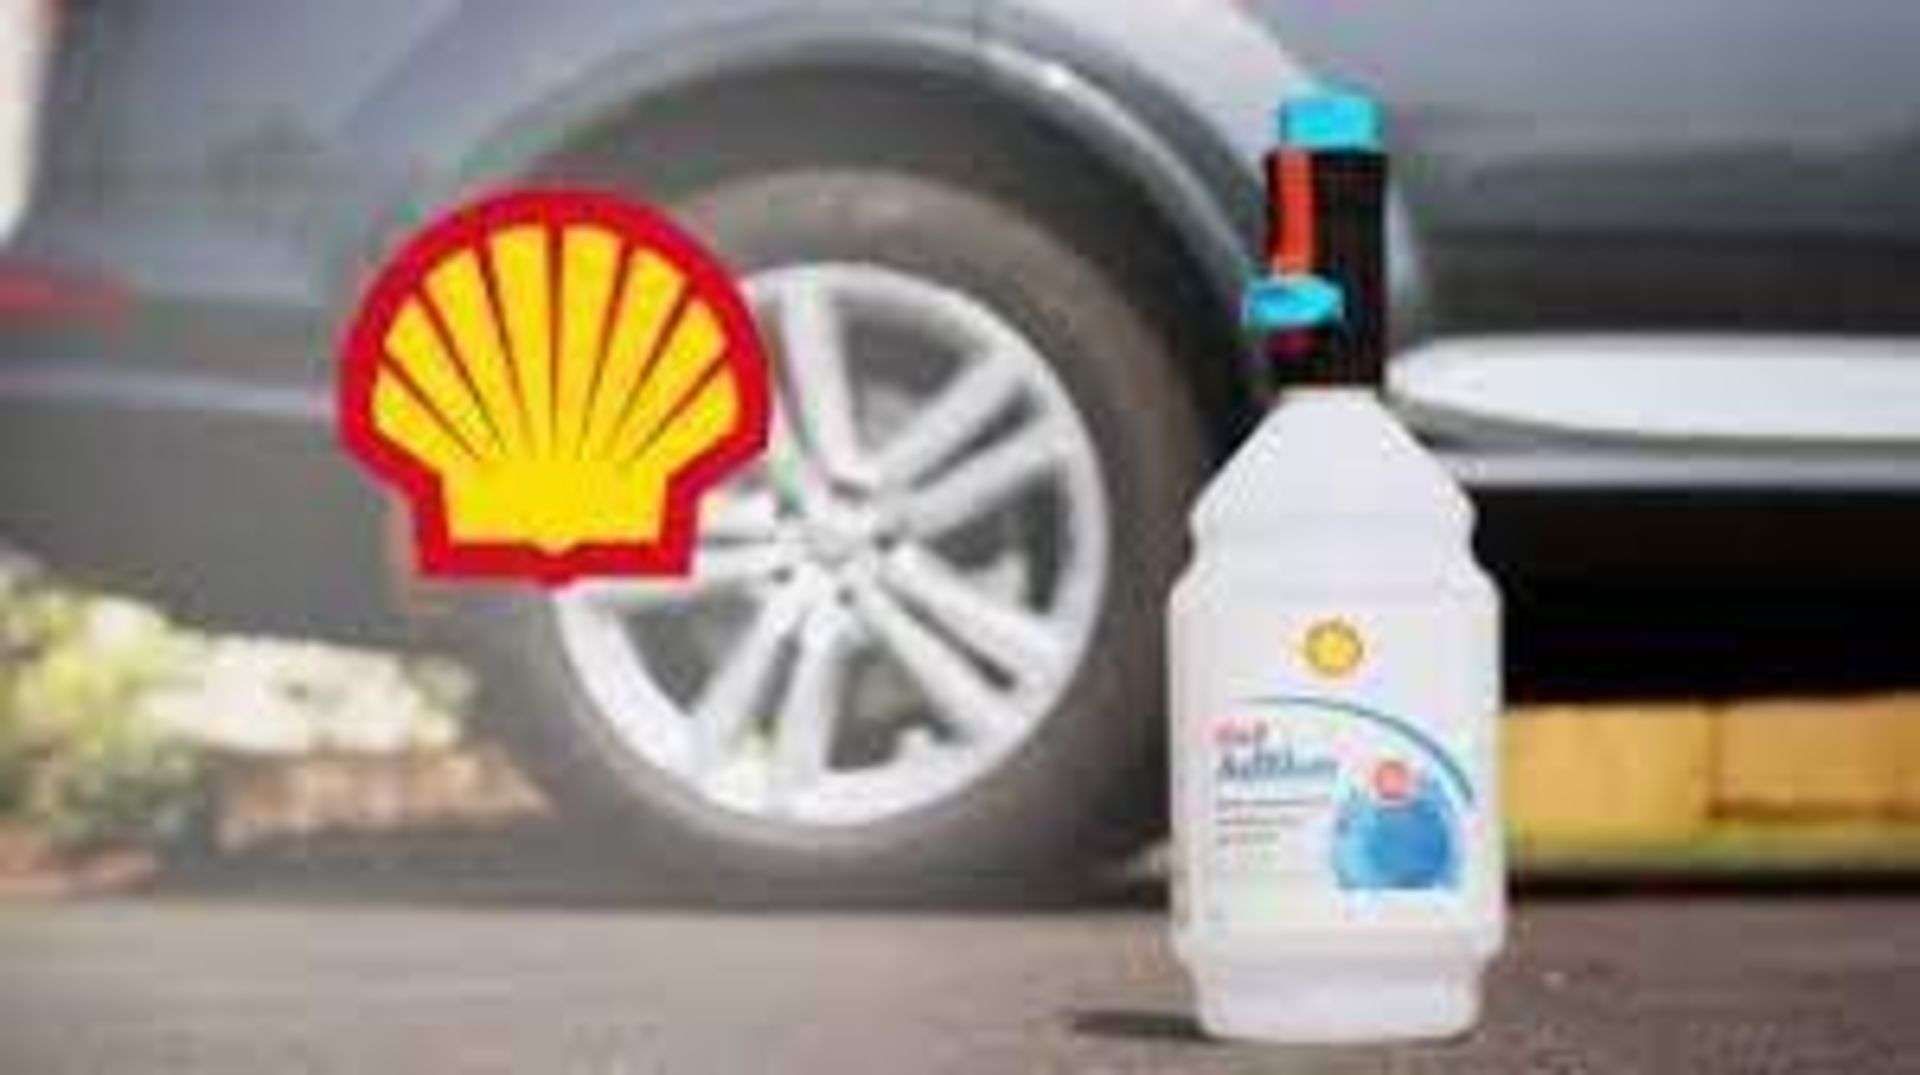 12 X BRAND NEW 1.5L ADBLUE FROM SHELL FOR ALL ADBLE VEHICLES, 100% SPILL FREE